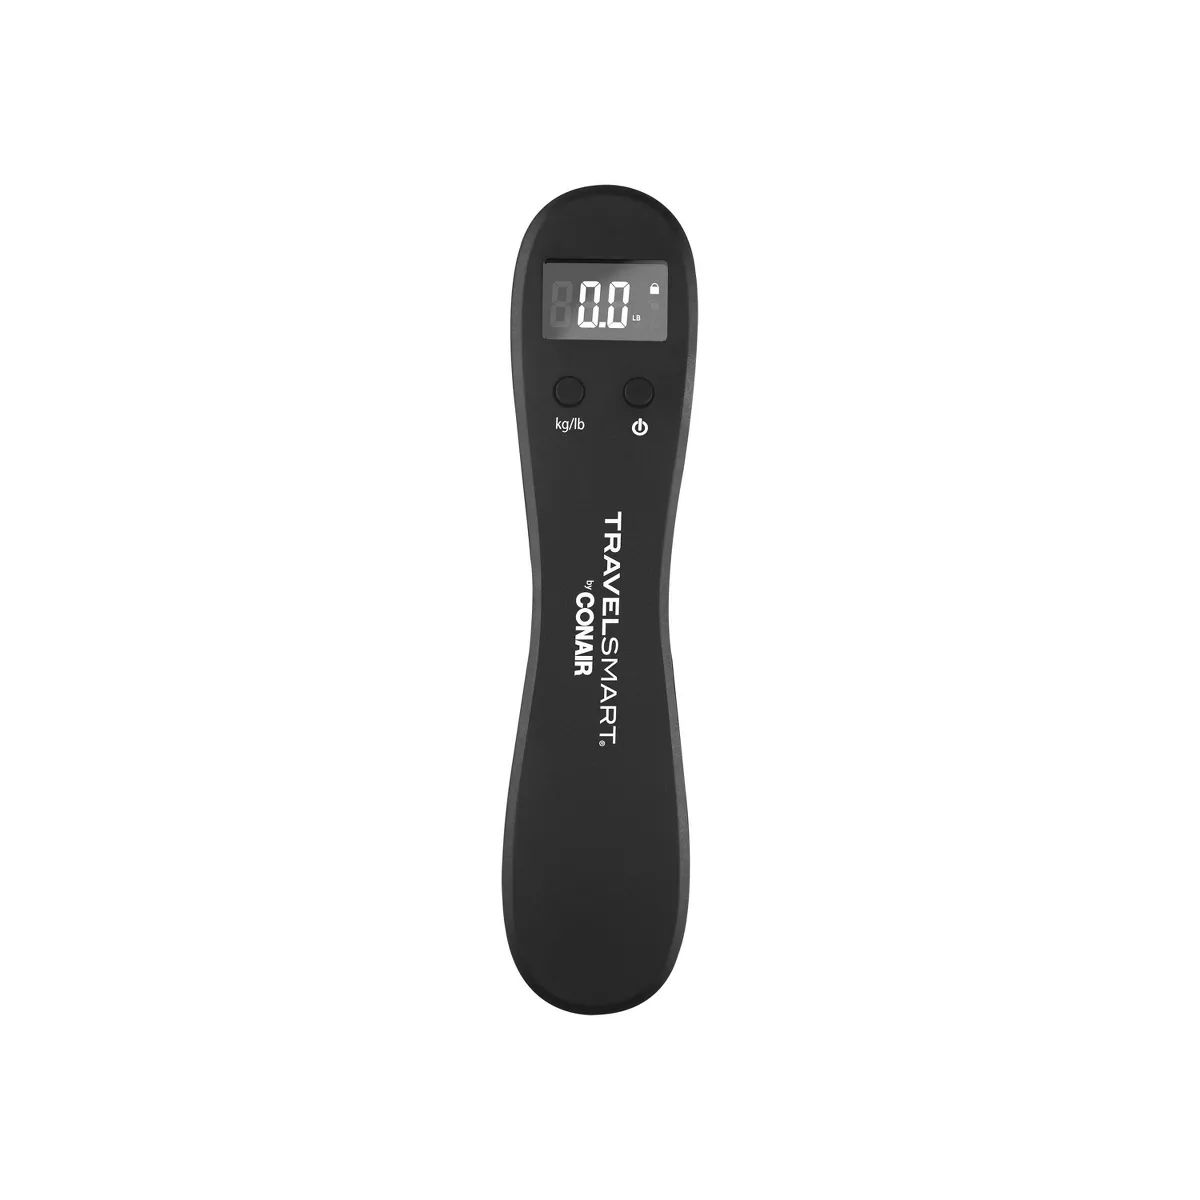 Travel Smart by Conair Digital Luggage Scale | Target